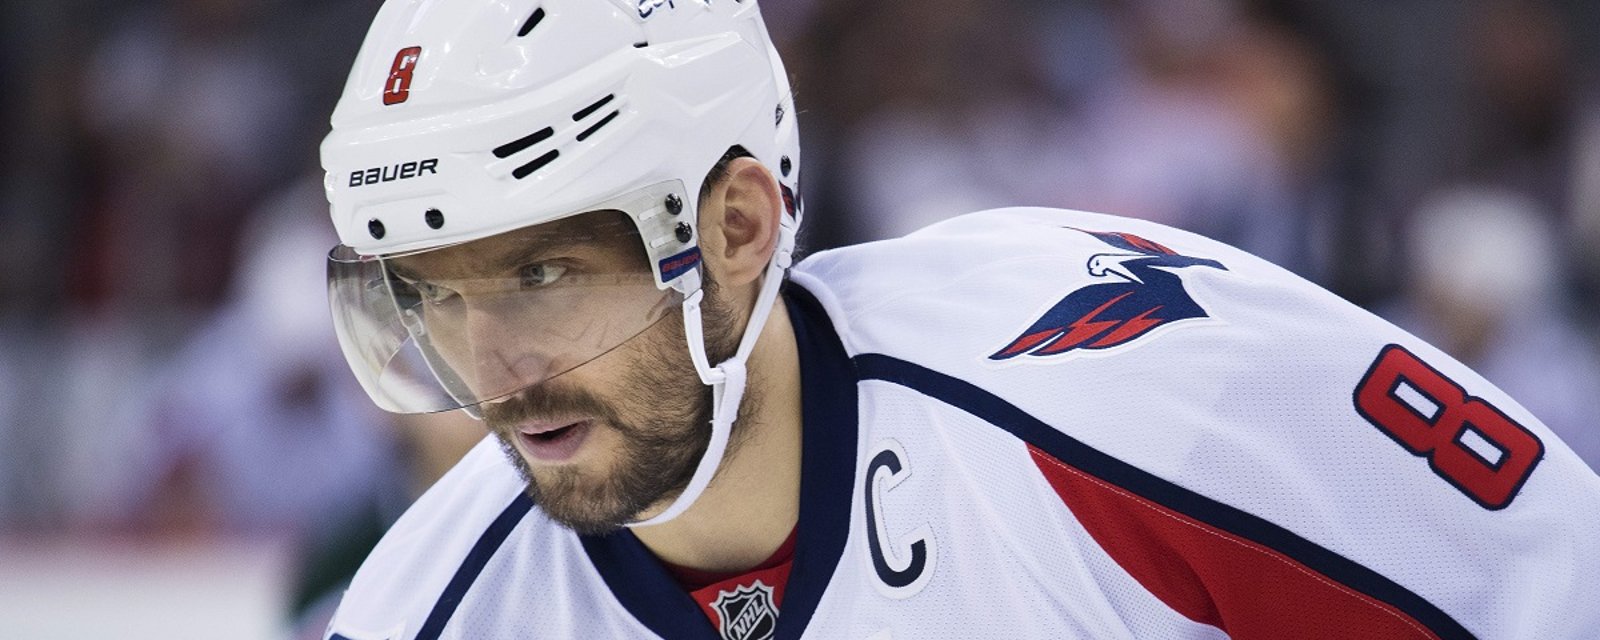 Insider suggest the Capitals should be “trying to find a dancing partner to see if there’s a good trade,” for Ovechkin!